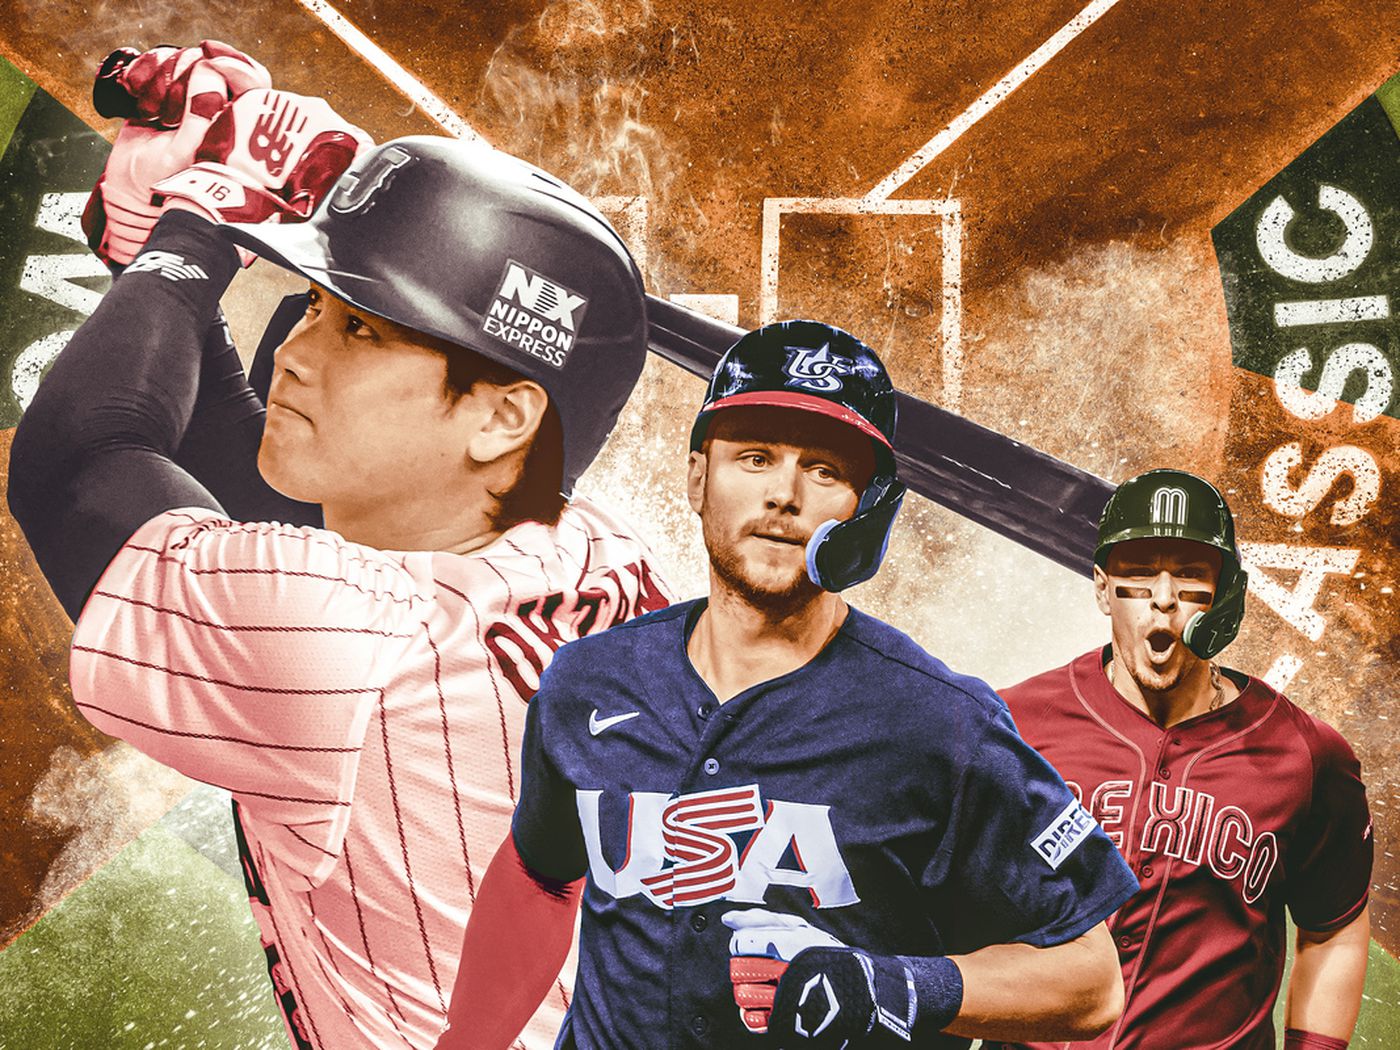 The Moments From a Classic World Baseball Classic